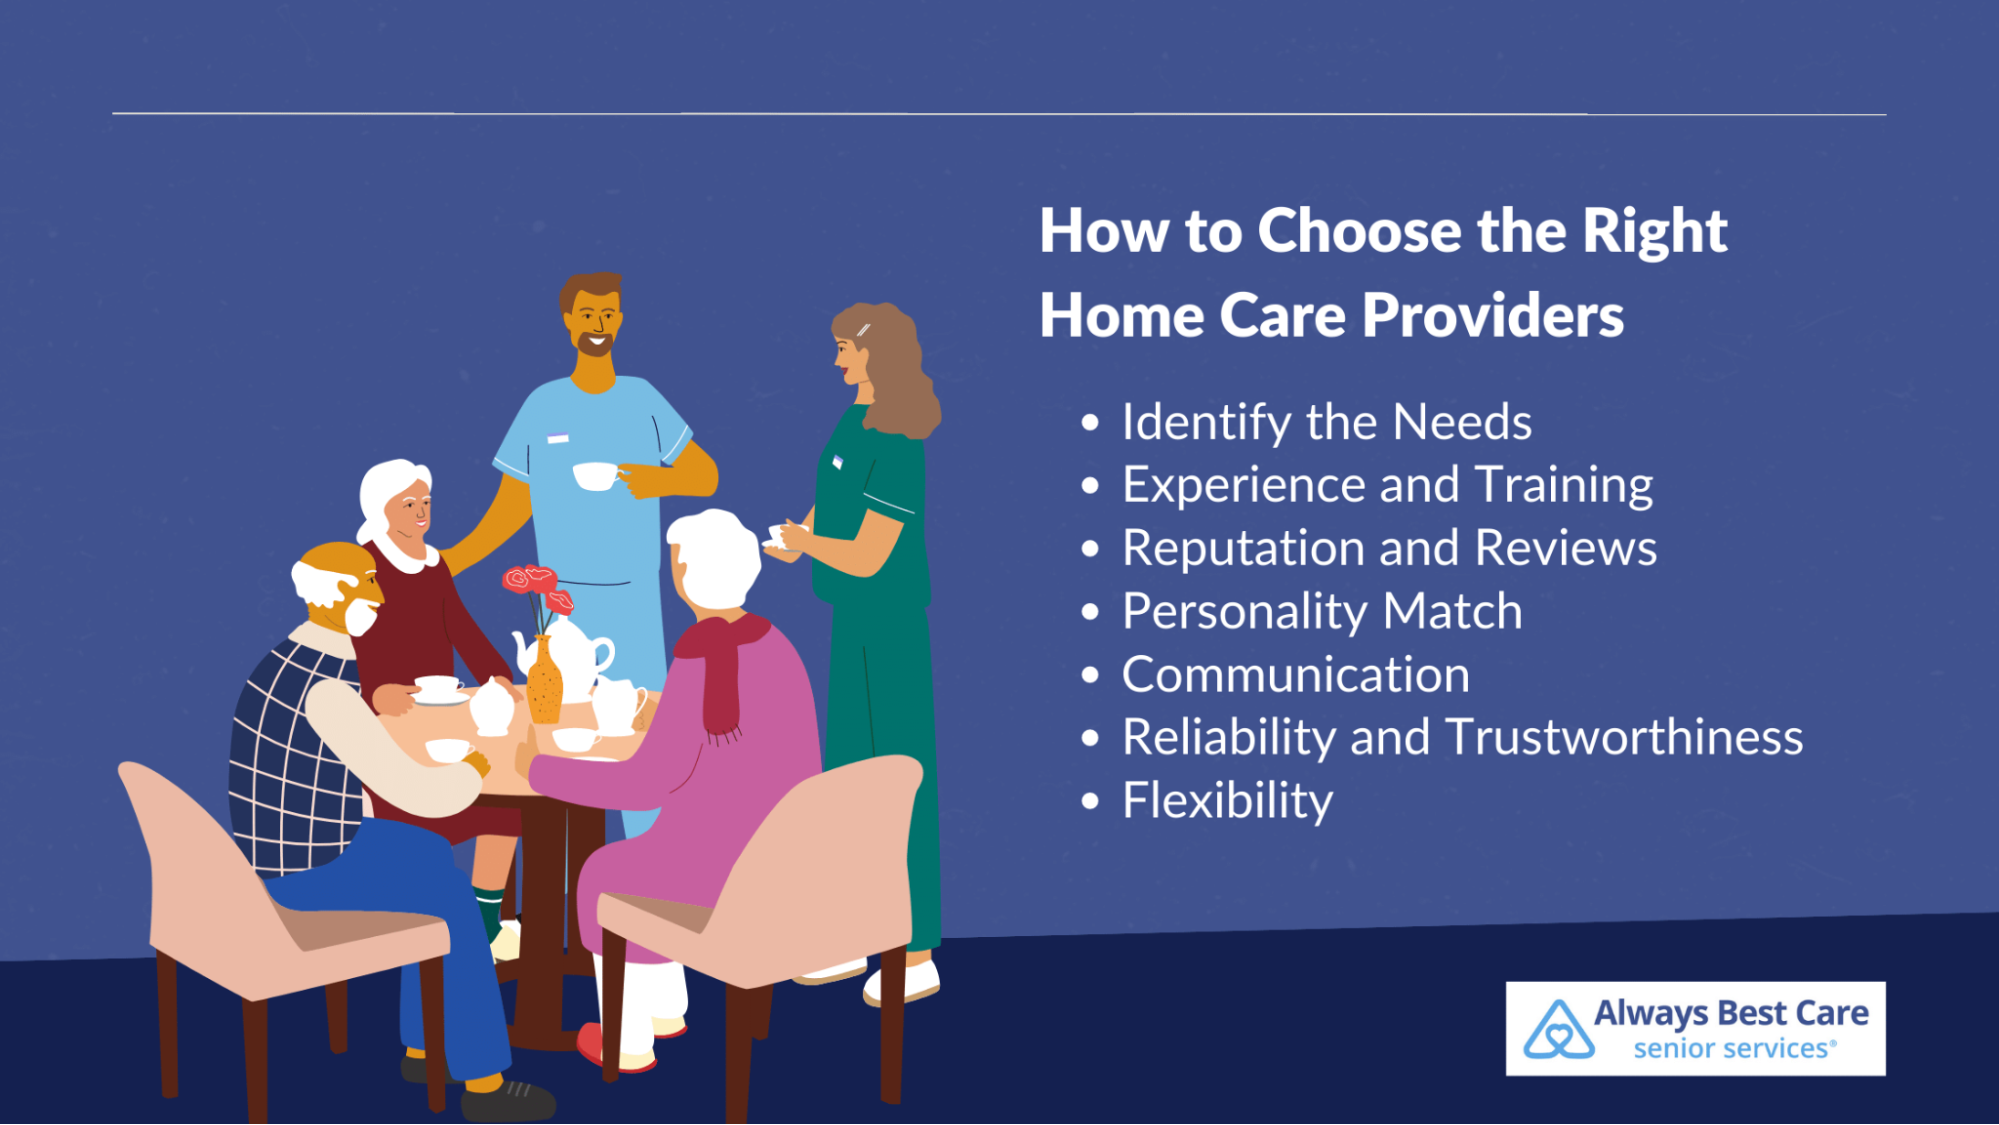 How to Choose the Right Home Care Providers